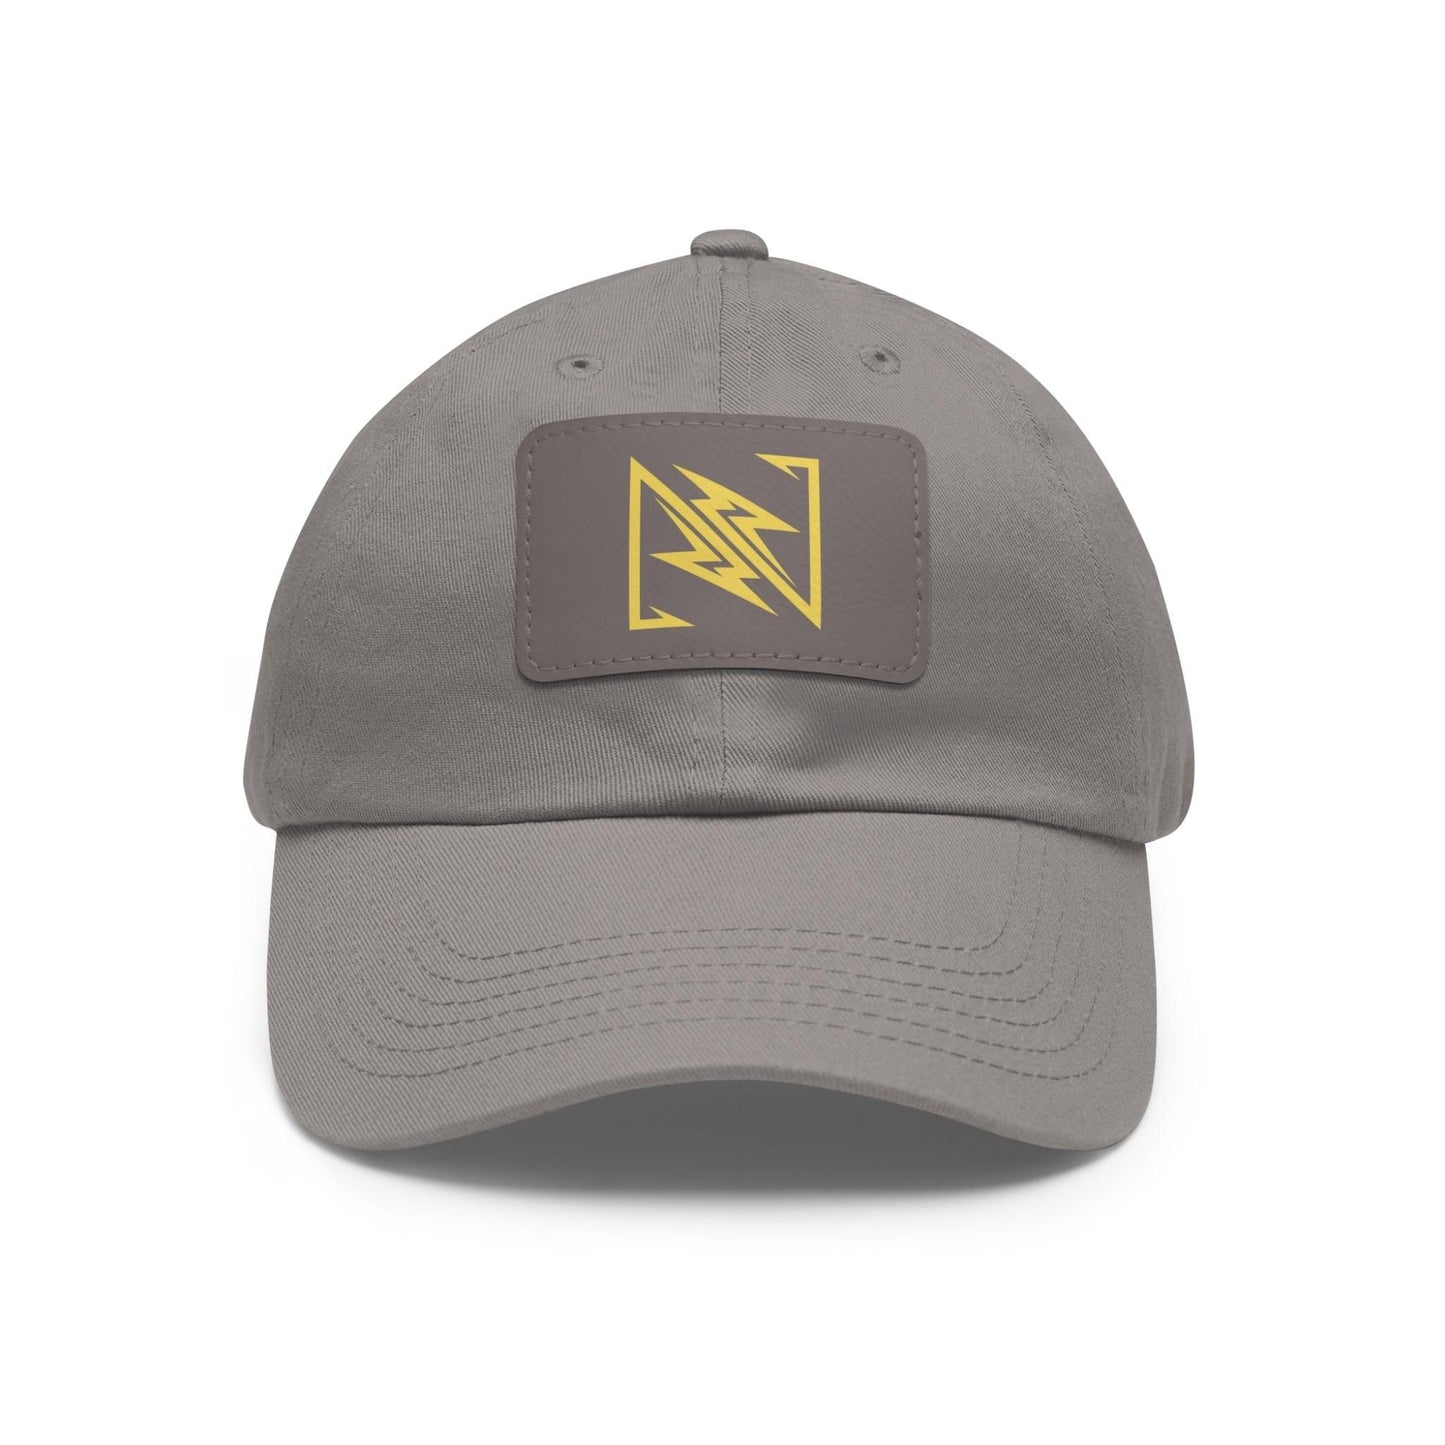 NX Vogue Premium Baseball Hat with Leather Patch Cap Grey / Grey patch Rectangle One size